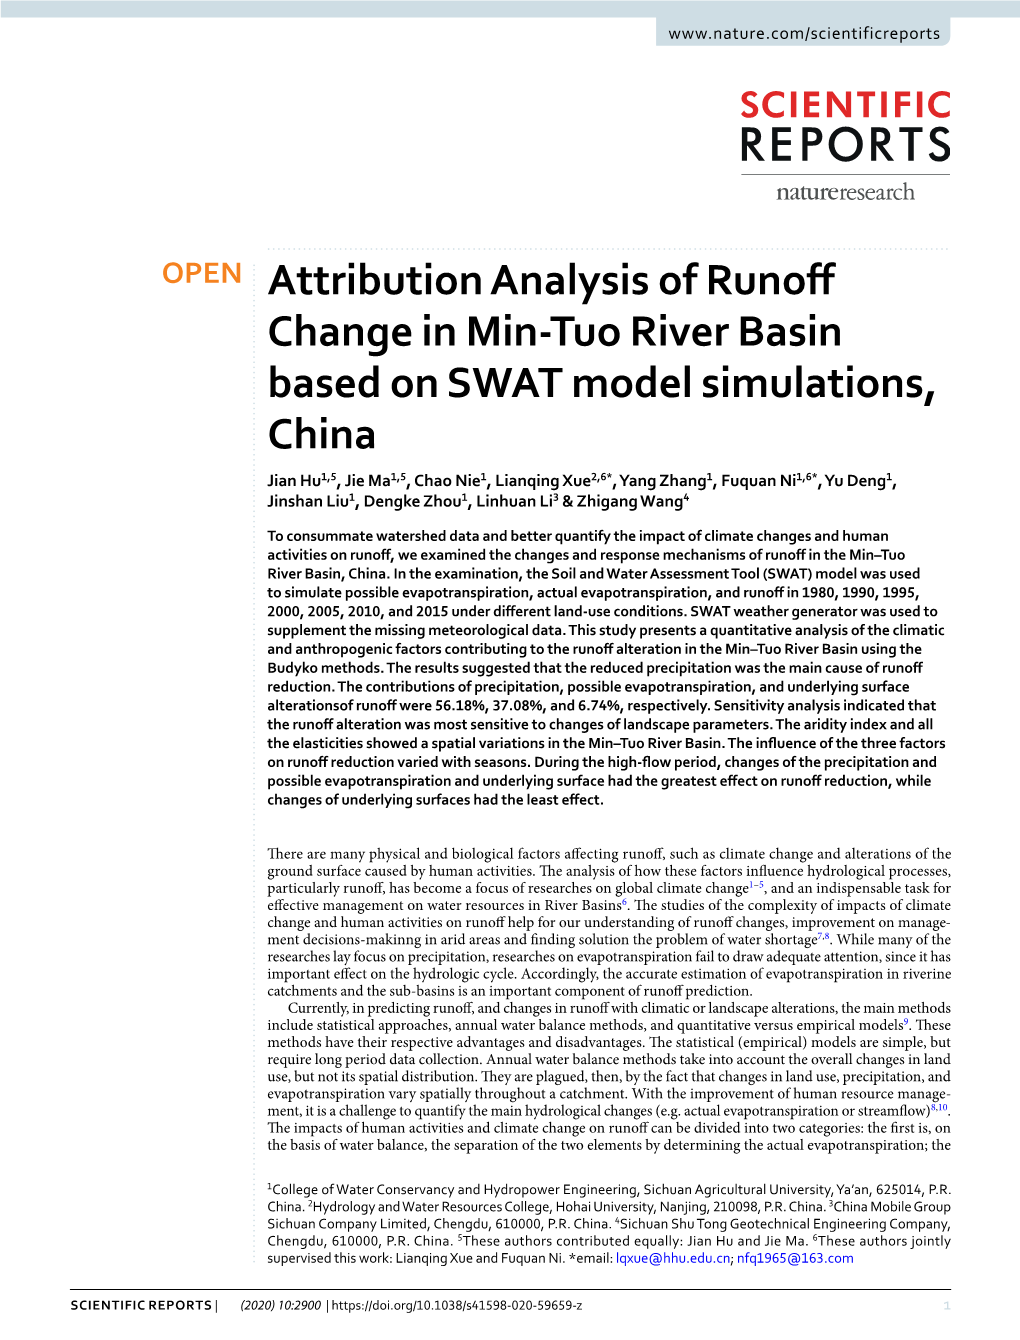 Attribution Analysis of Runoff Change in Min-Tuo River Basin Based On